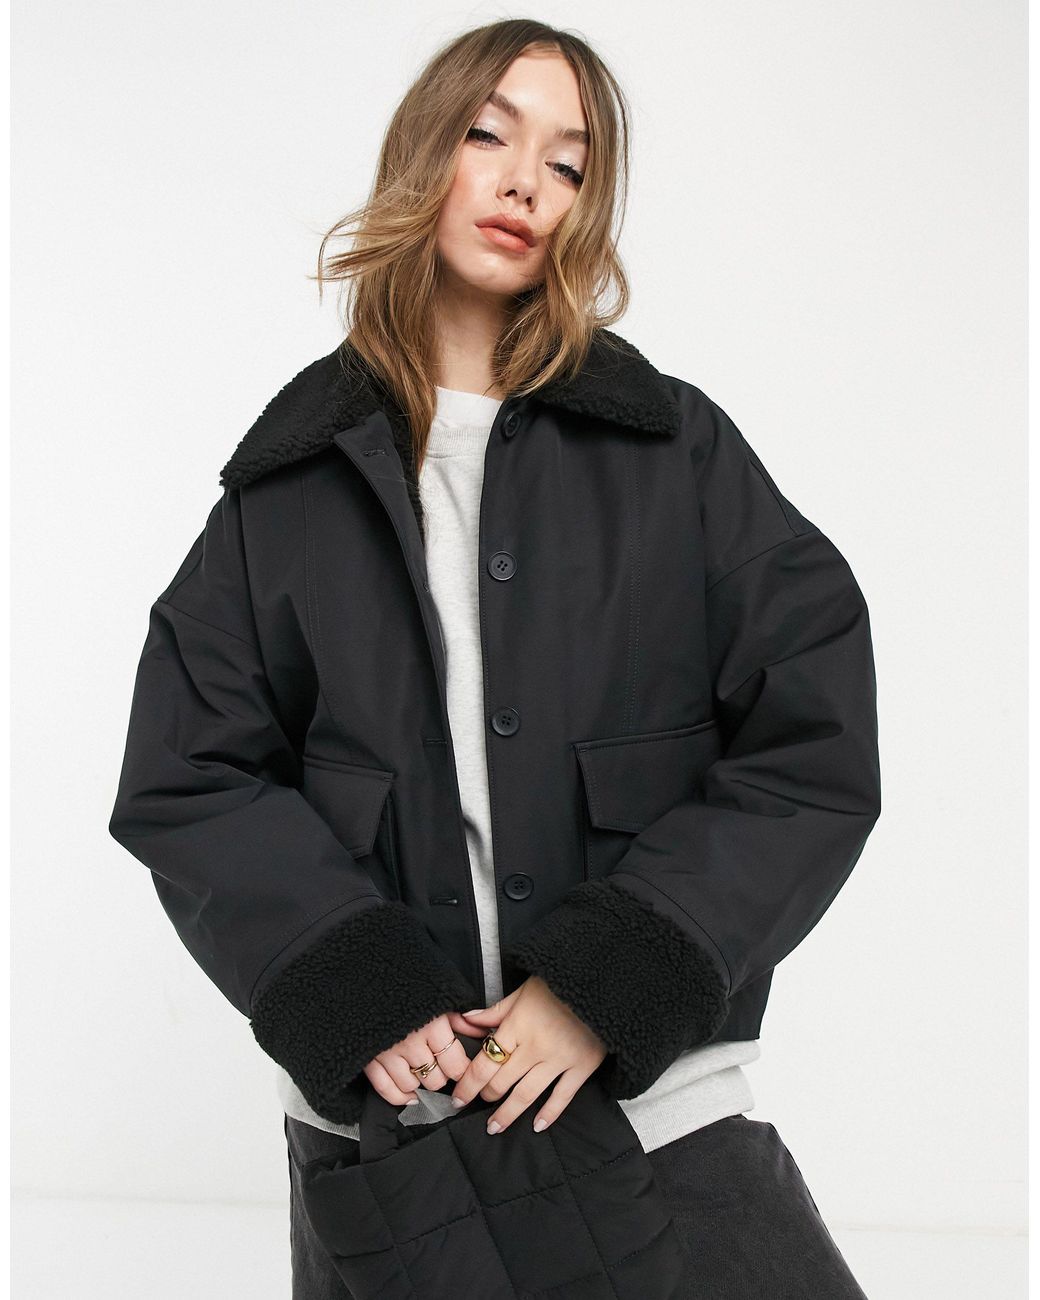 & Other Stories Shearling Detail Coat in Black | Lyst UK